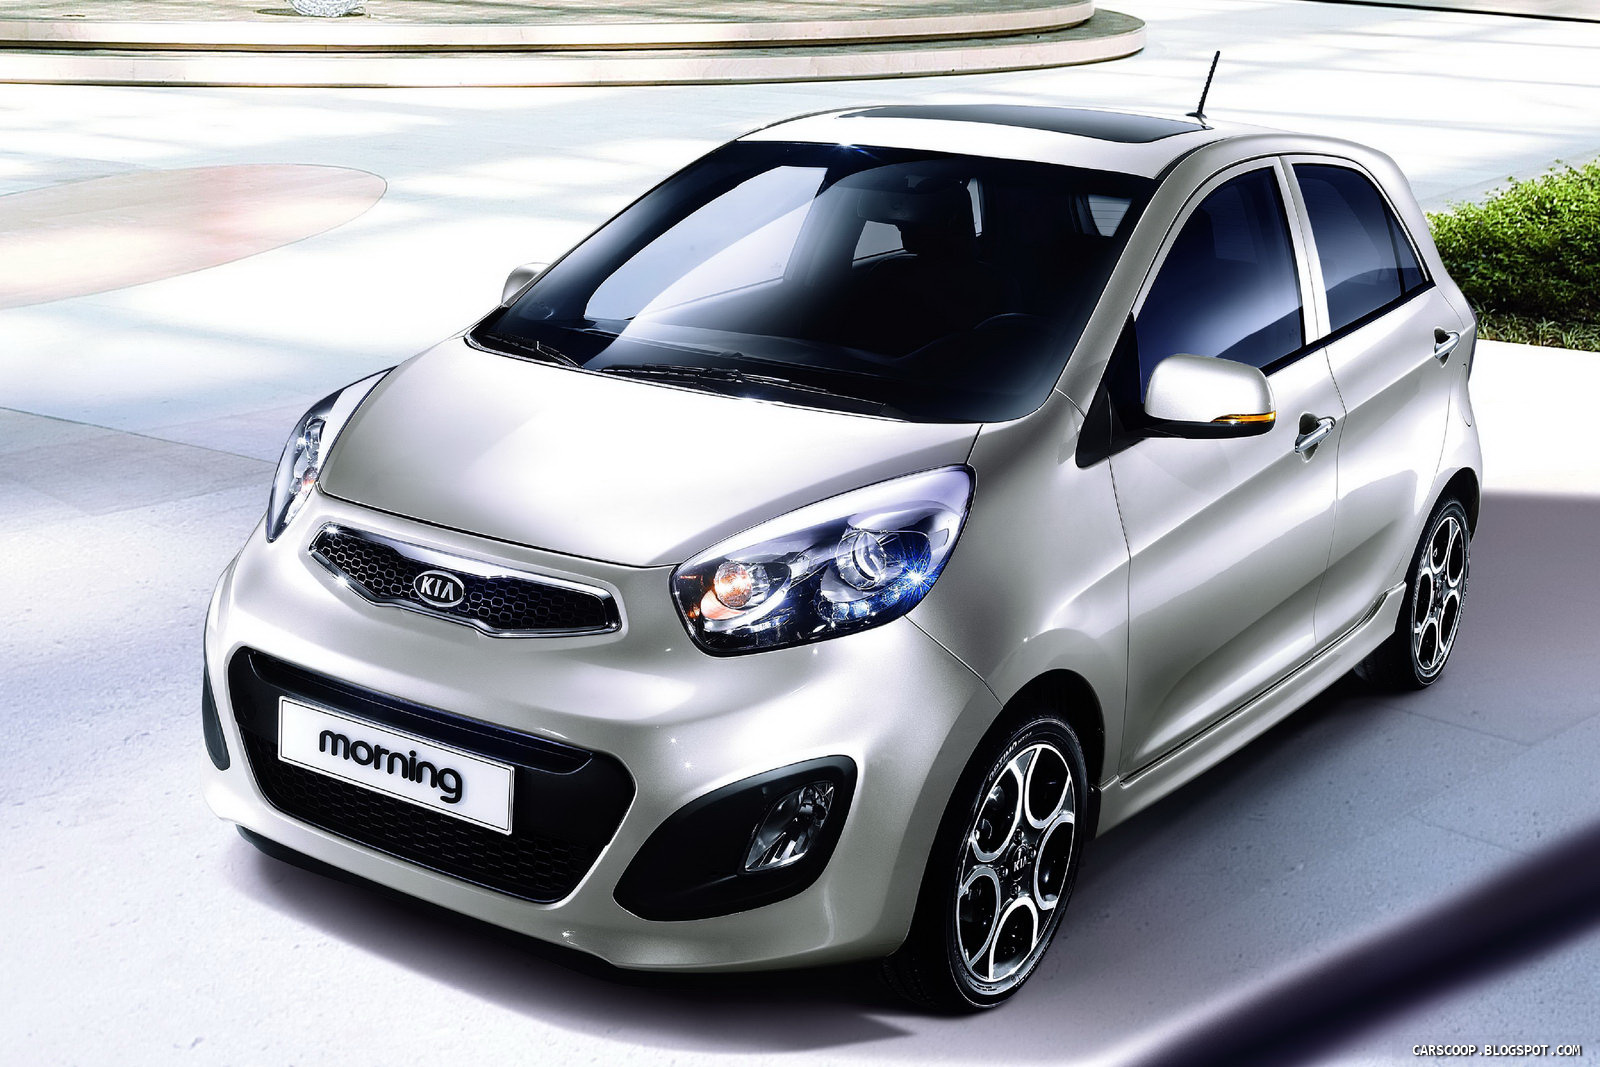 2012 Kia Picanto: HD Gallery and Official of South Korean Model | Carscoops